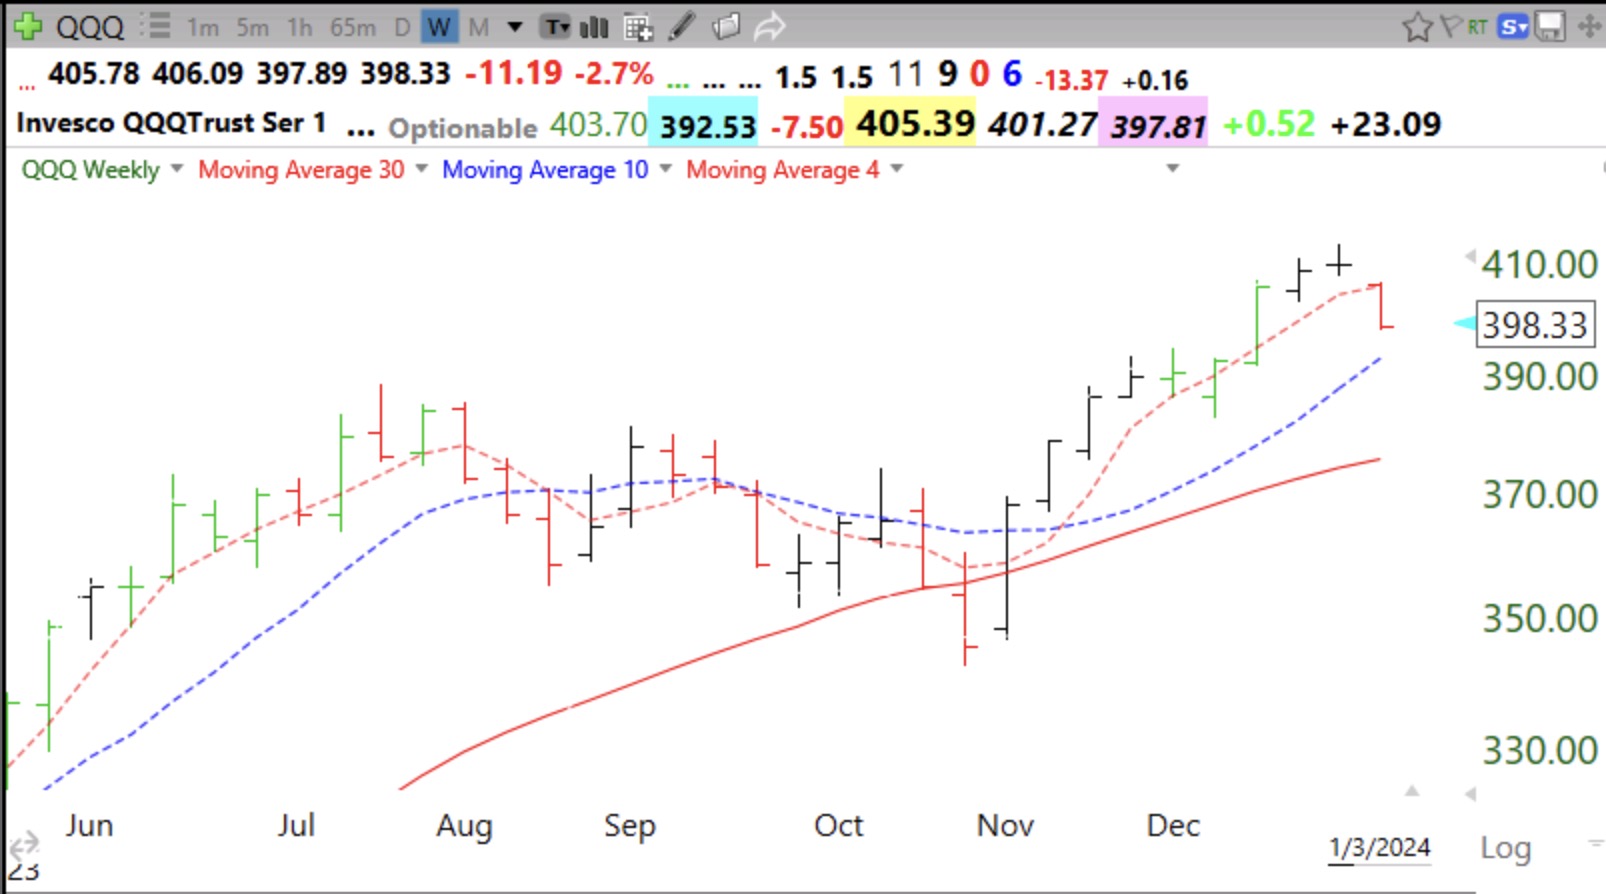 Blog Post: Day 41 of $QQQ short term up-trend, GMI declines to 4